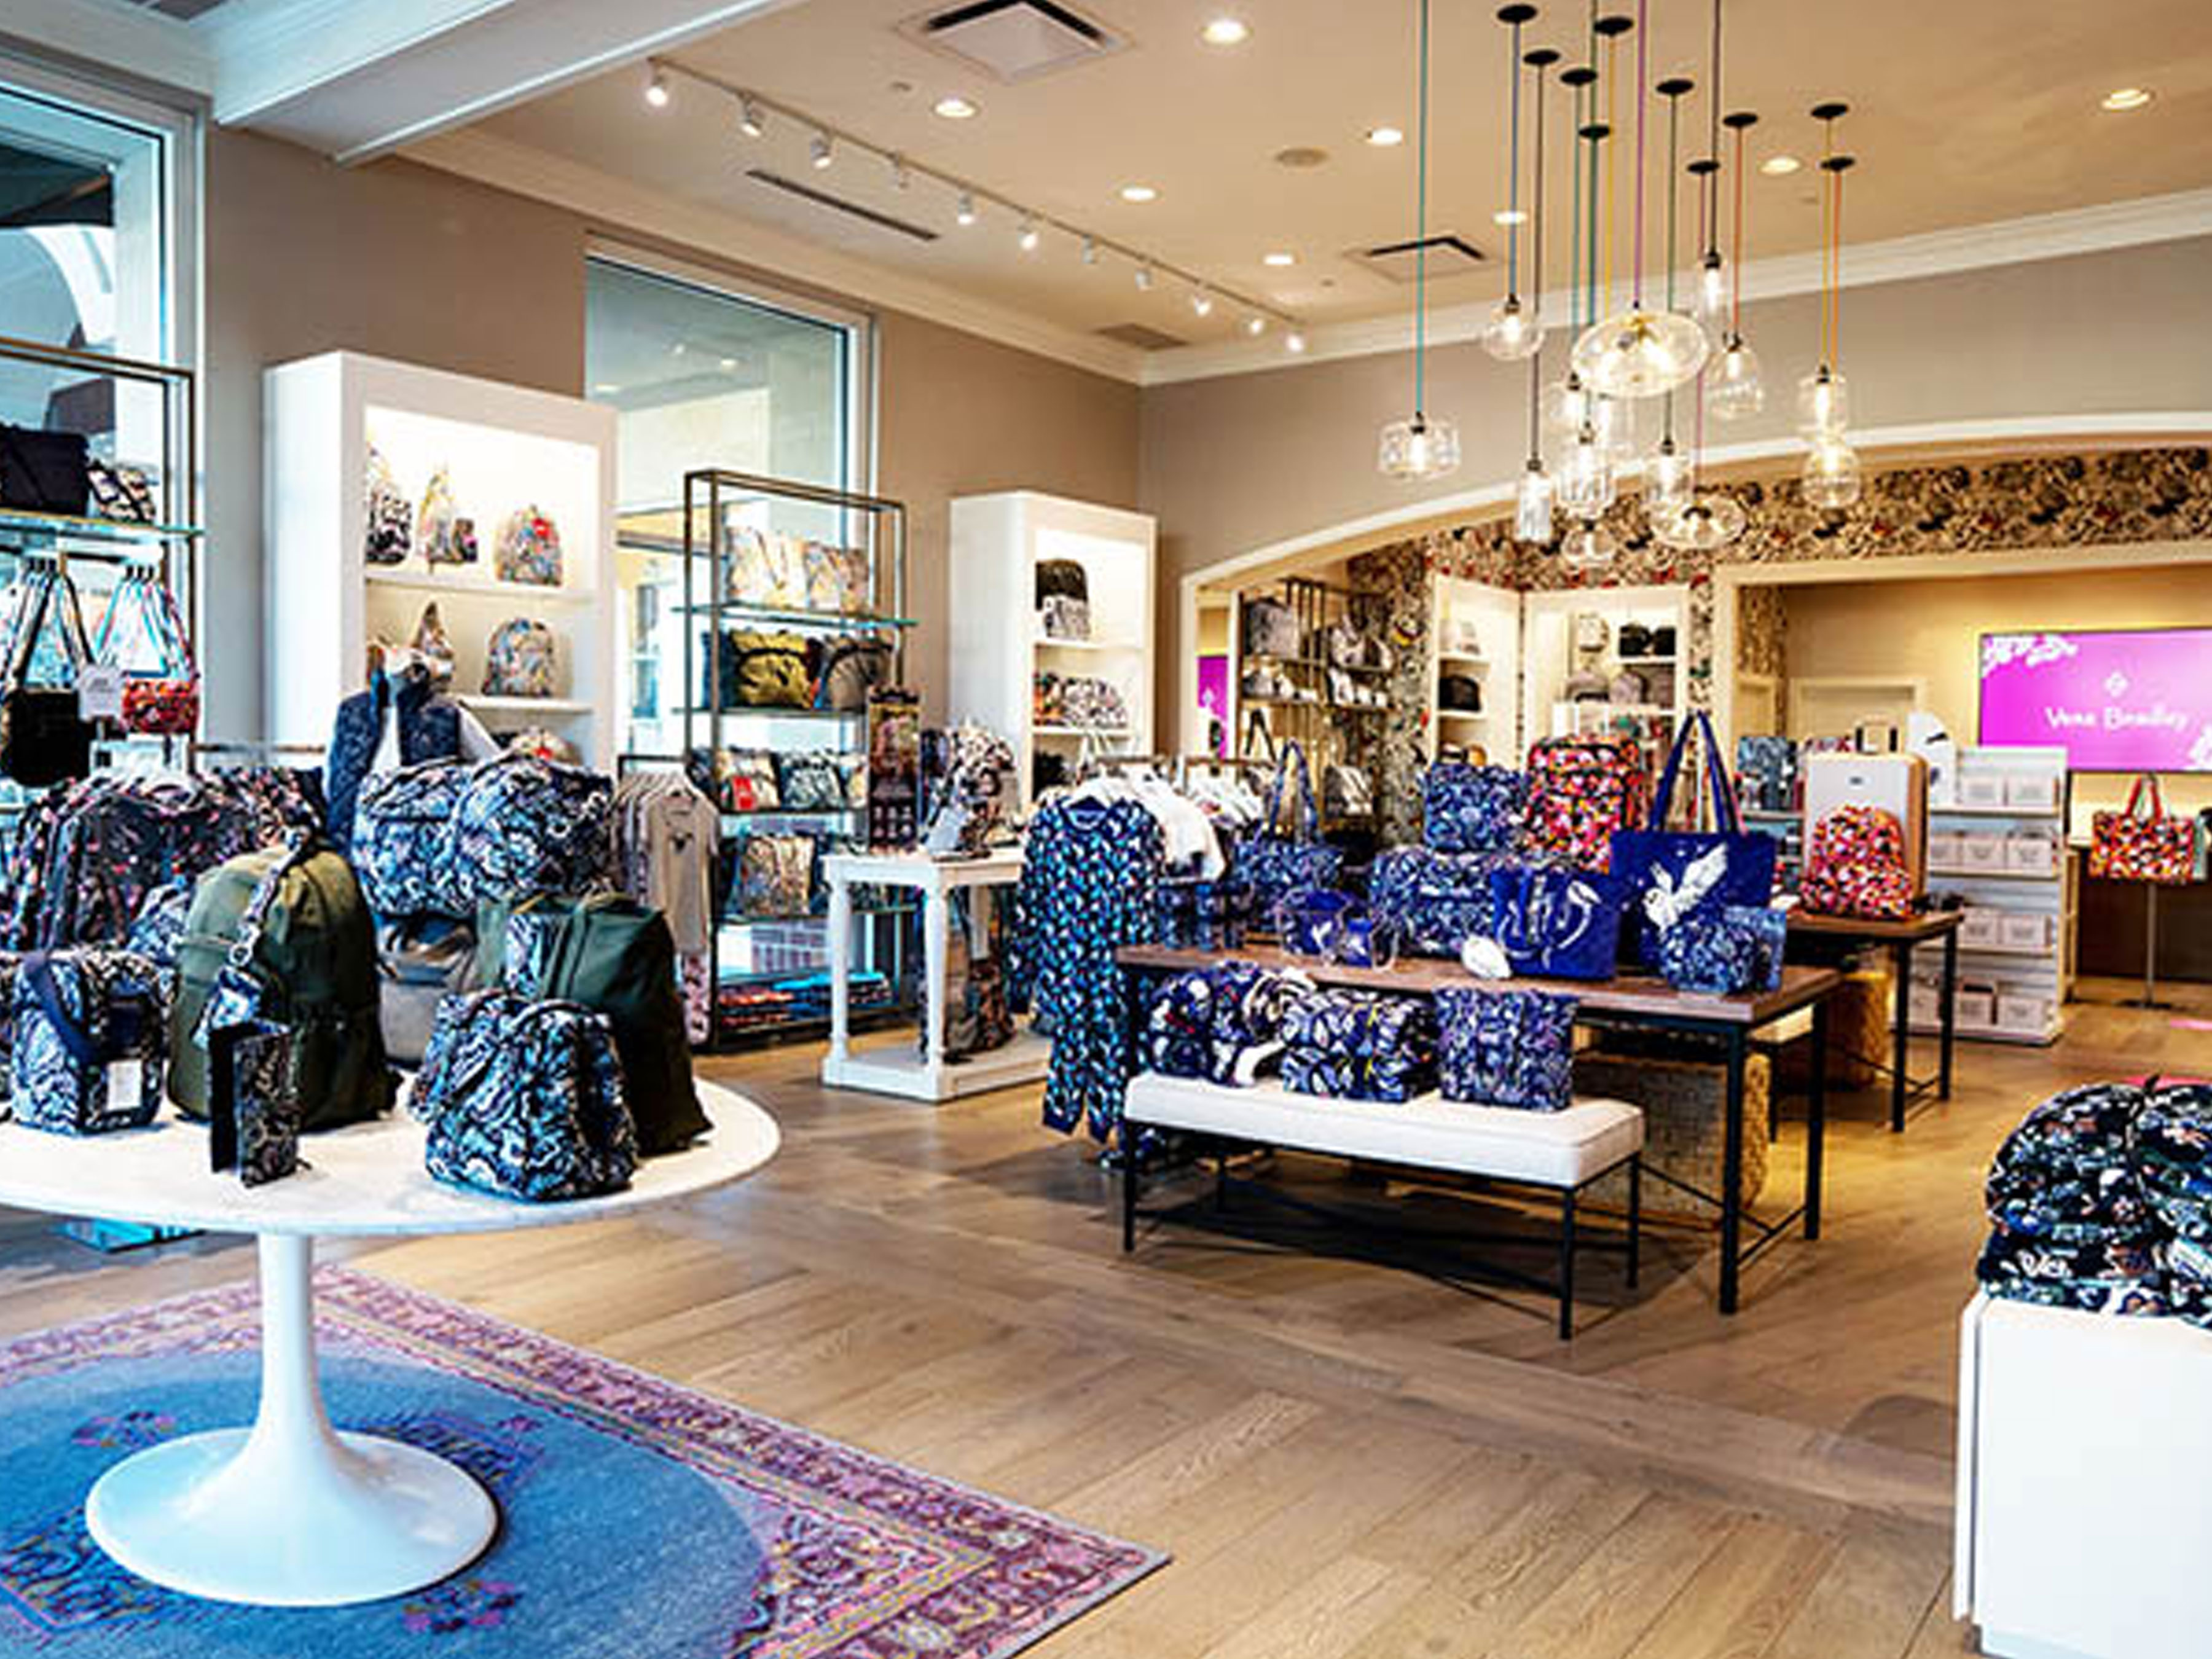 Vera Bradley Outlet is one of the best places to shop in Orlando